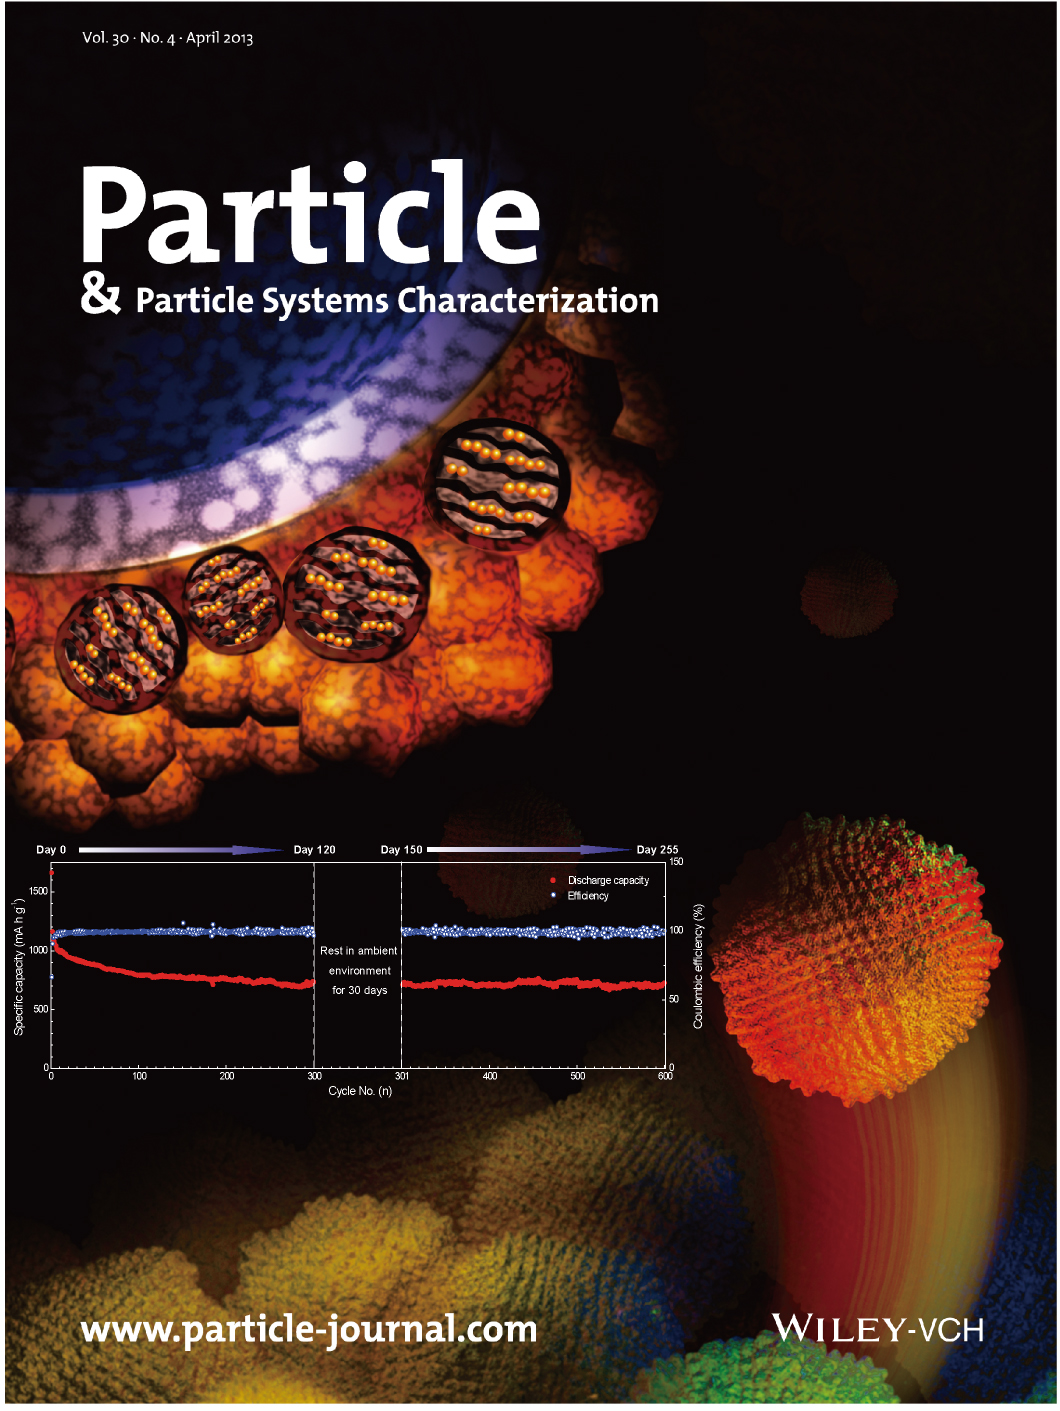 Particle cover.jpg